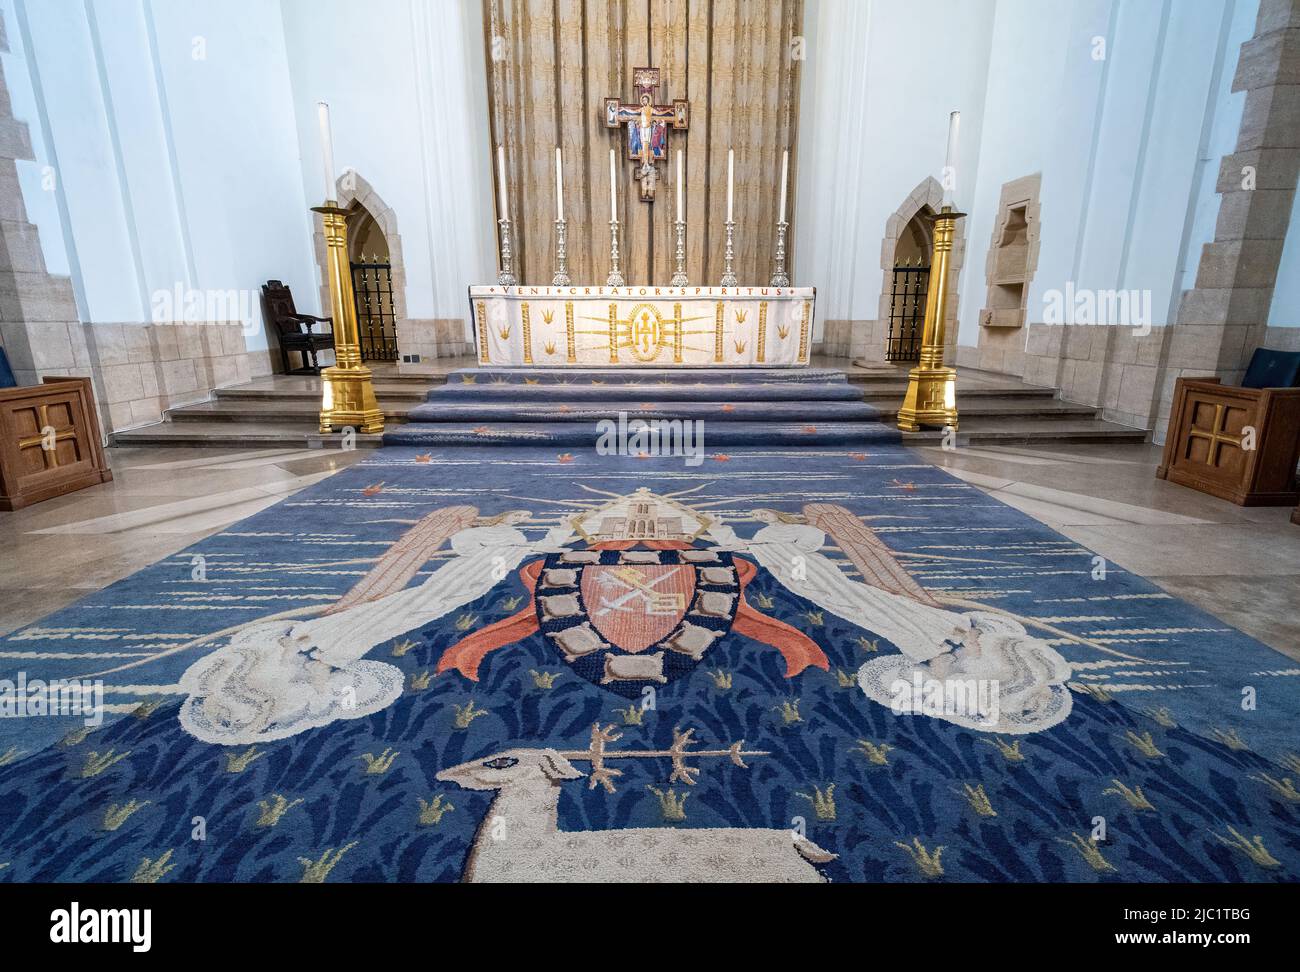 Altar and the Sanctuary carpet, interior of Guildford Cathedral, Surrey, England, UK Stock Photo